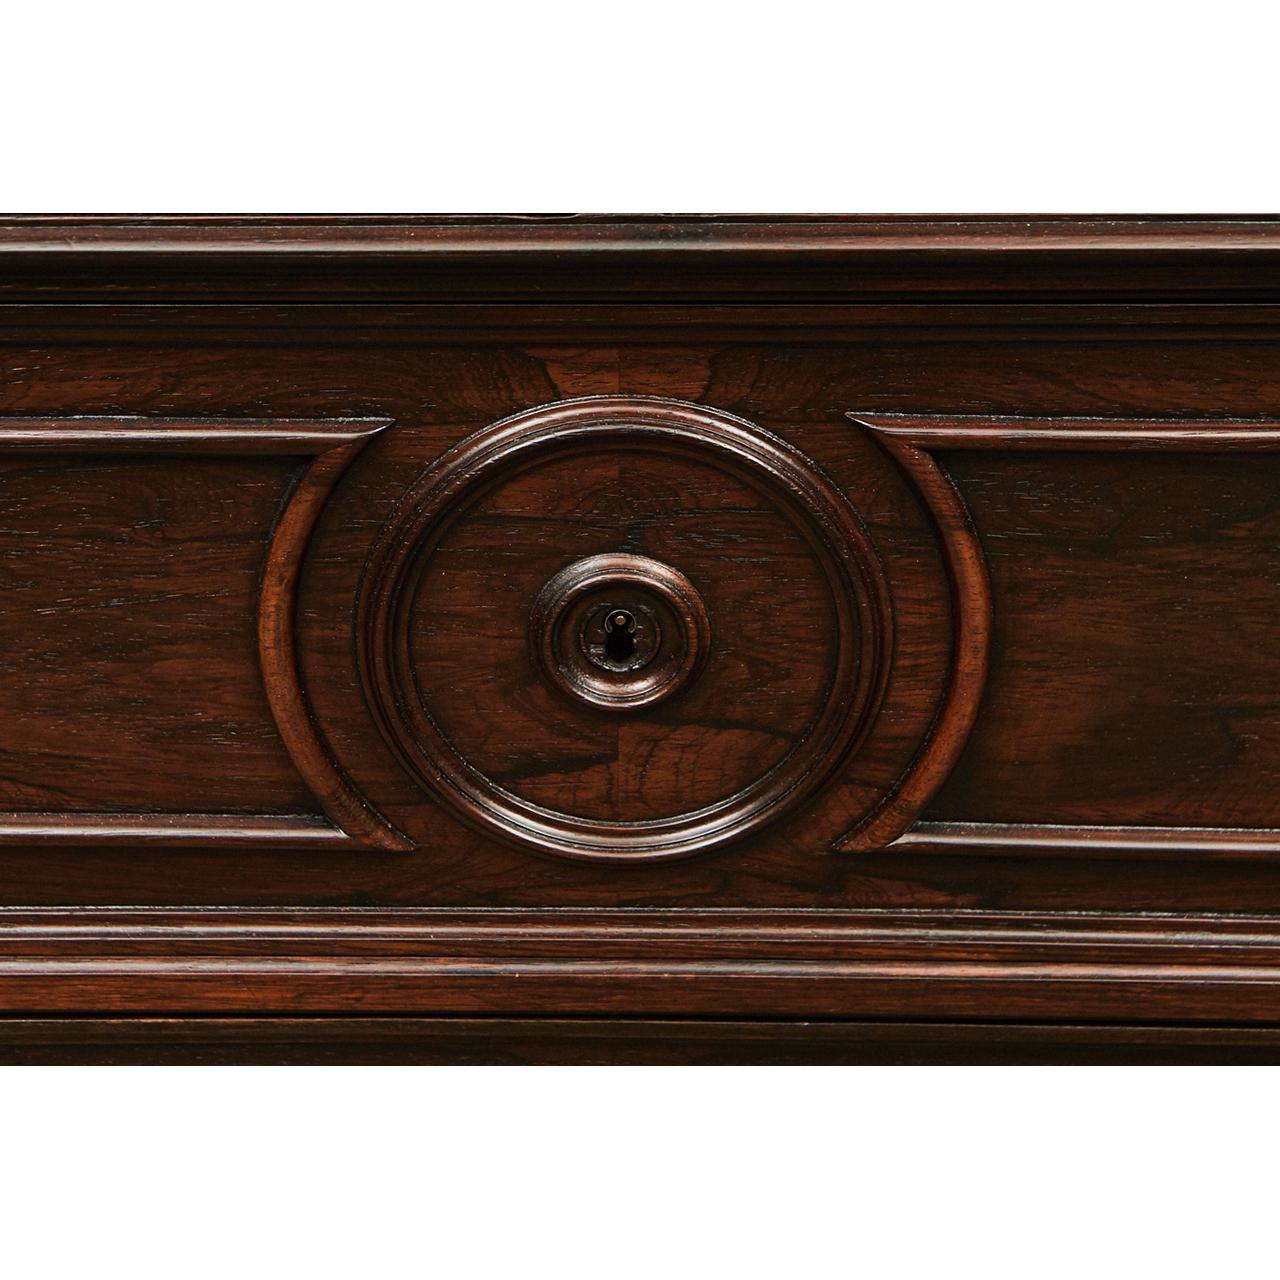 This lovely Victorian walnut commode with a marble top has beautiful craftsmanship inside and out. Each drawer has fine dovetail joints. The piece has walnut veneer. The molding details and turned wooden escutcheons indicate it’s age and quality.
 